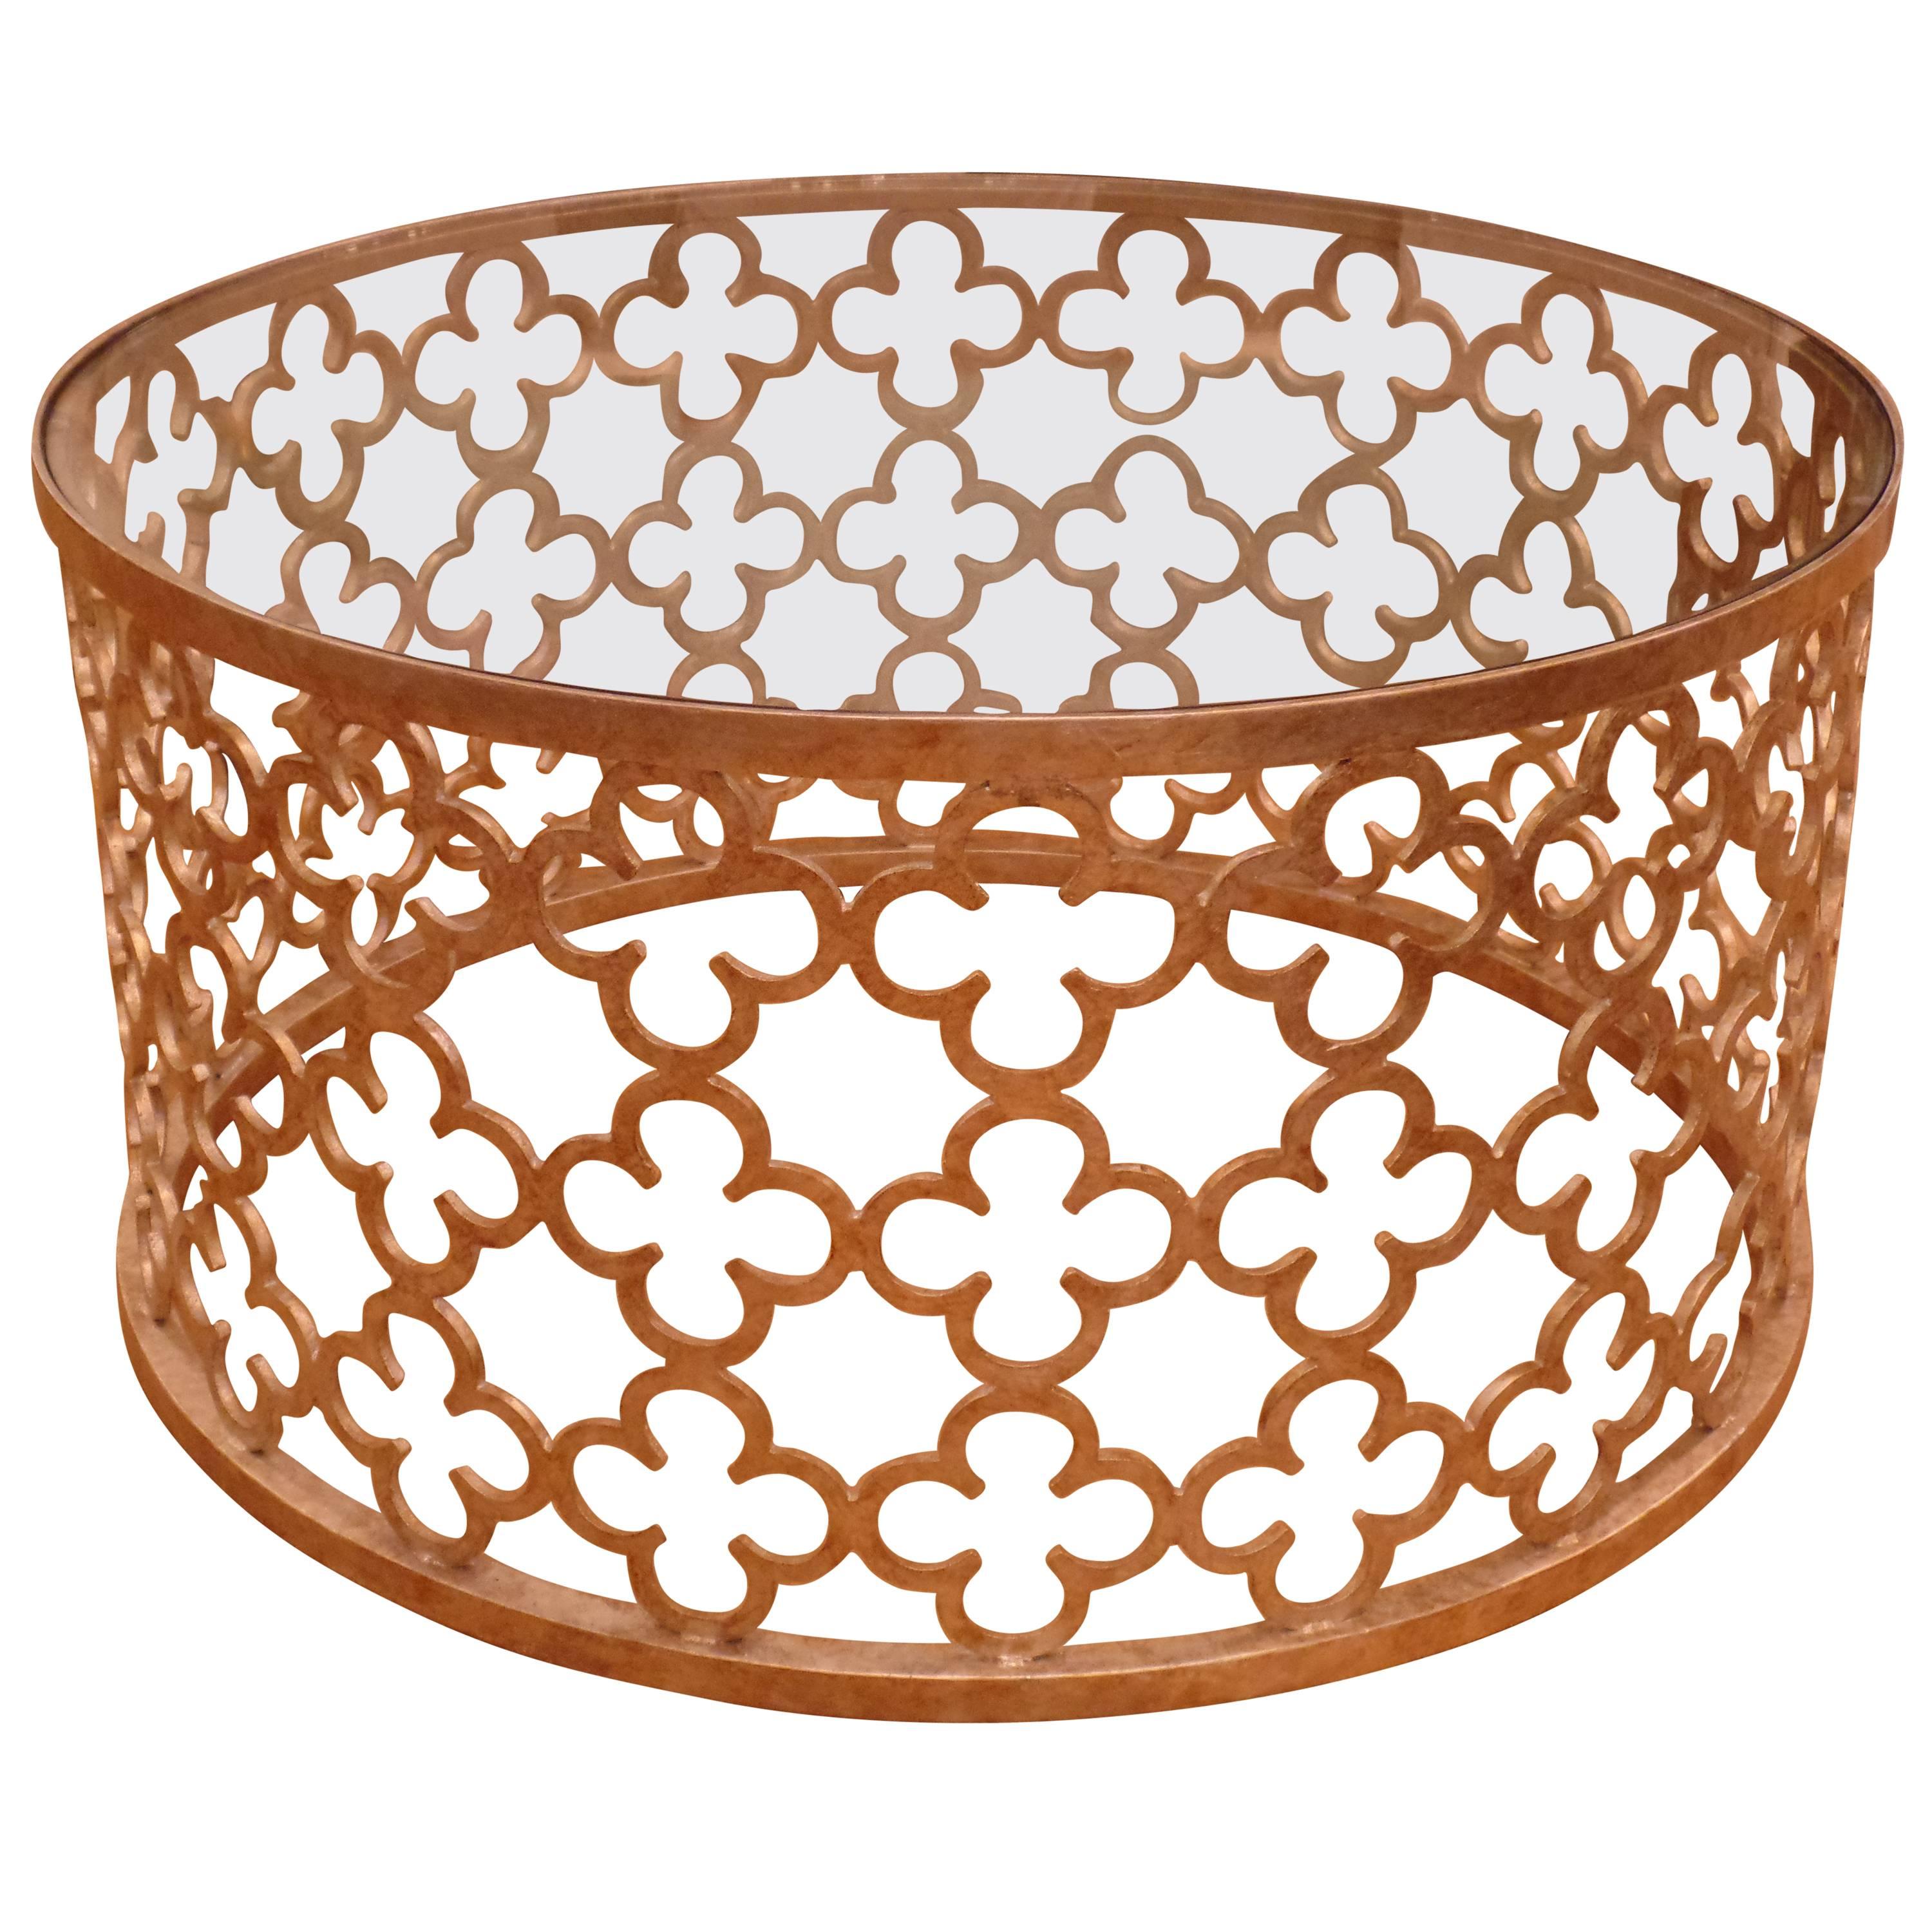 An elegant and stunning Italian Mid-Century Modern style circular wrought iron cocktail table formed of pieces of hand-wrought iron cut in quatrefoil pattern and antiqued gold on top of silver leaf. A top of clear tempered glass is set into the